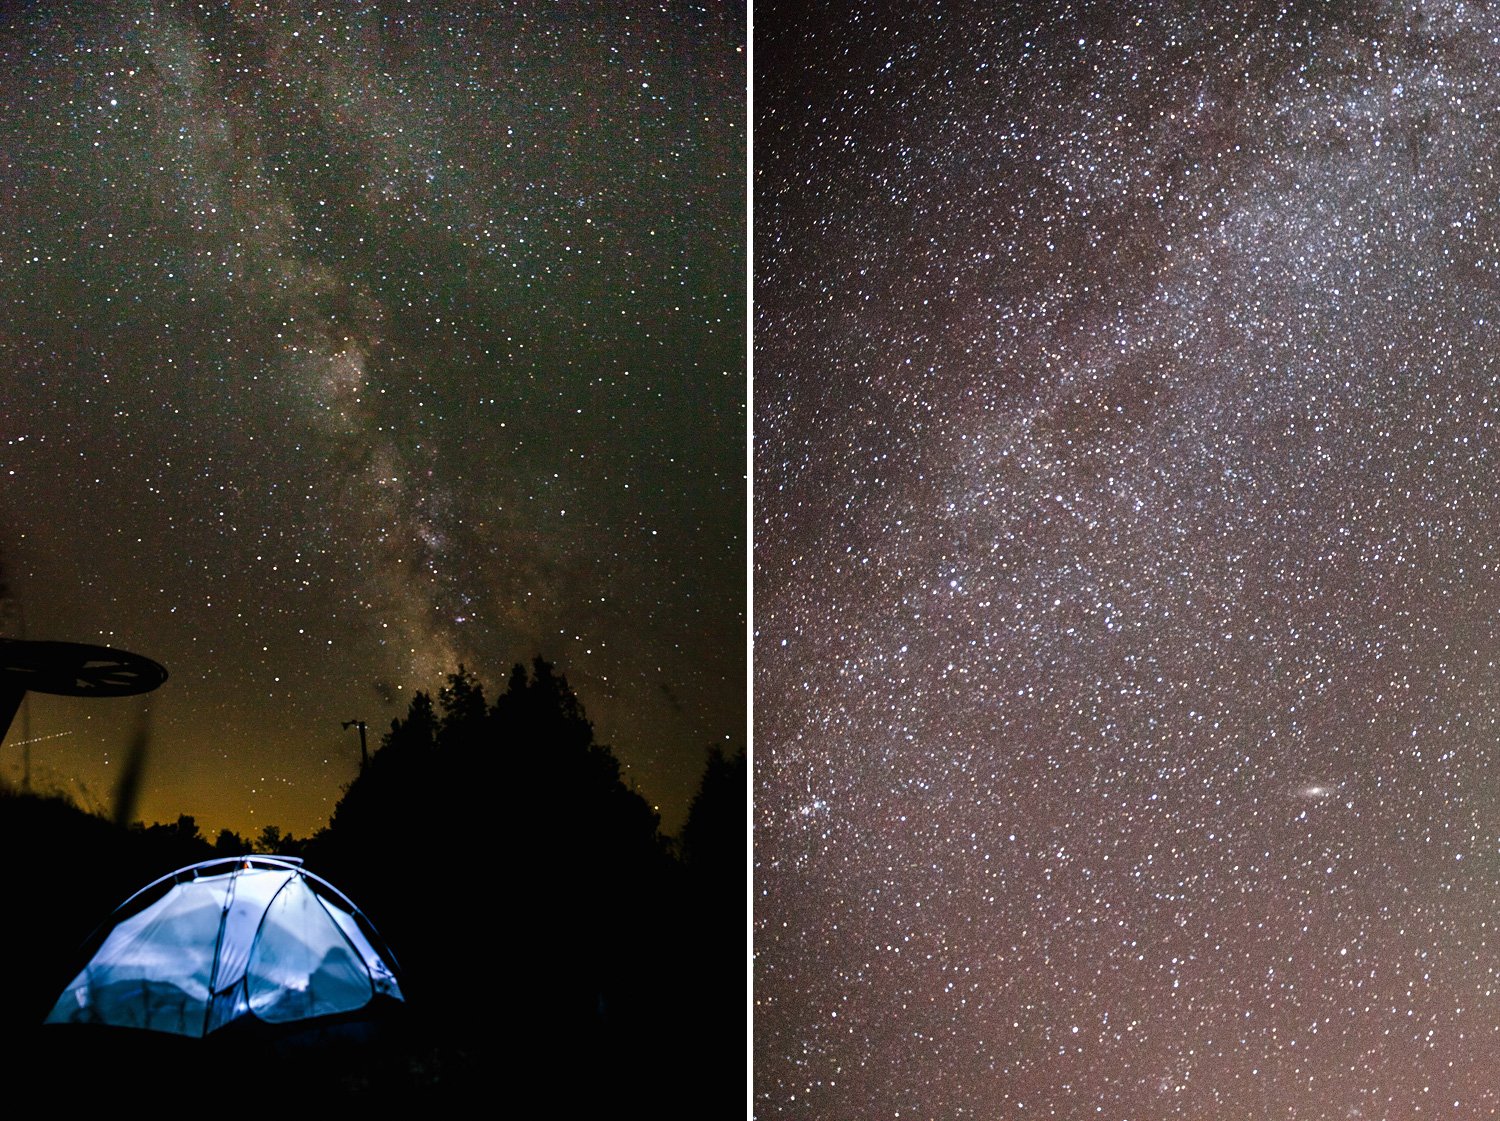 110-milky-way-and-tent.jpg